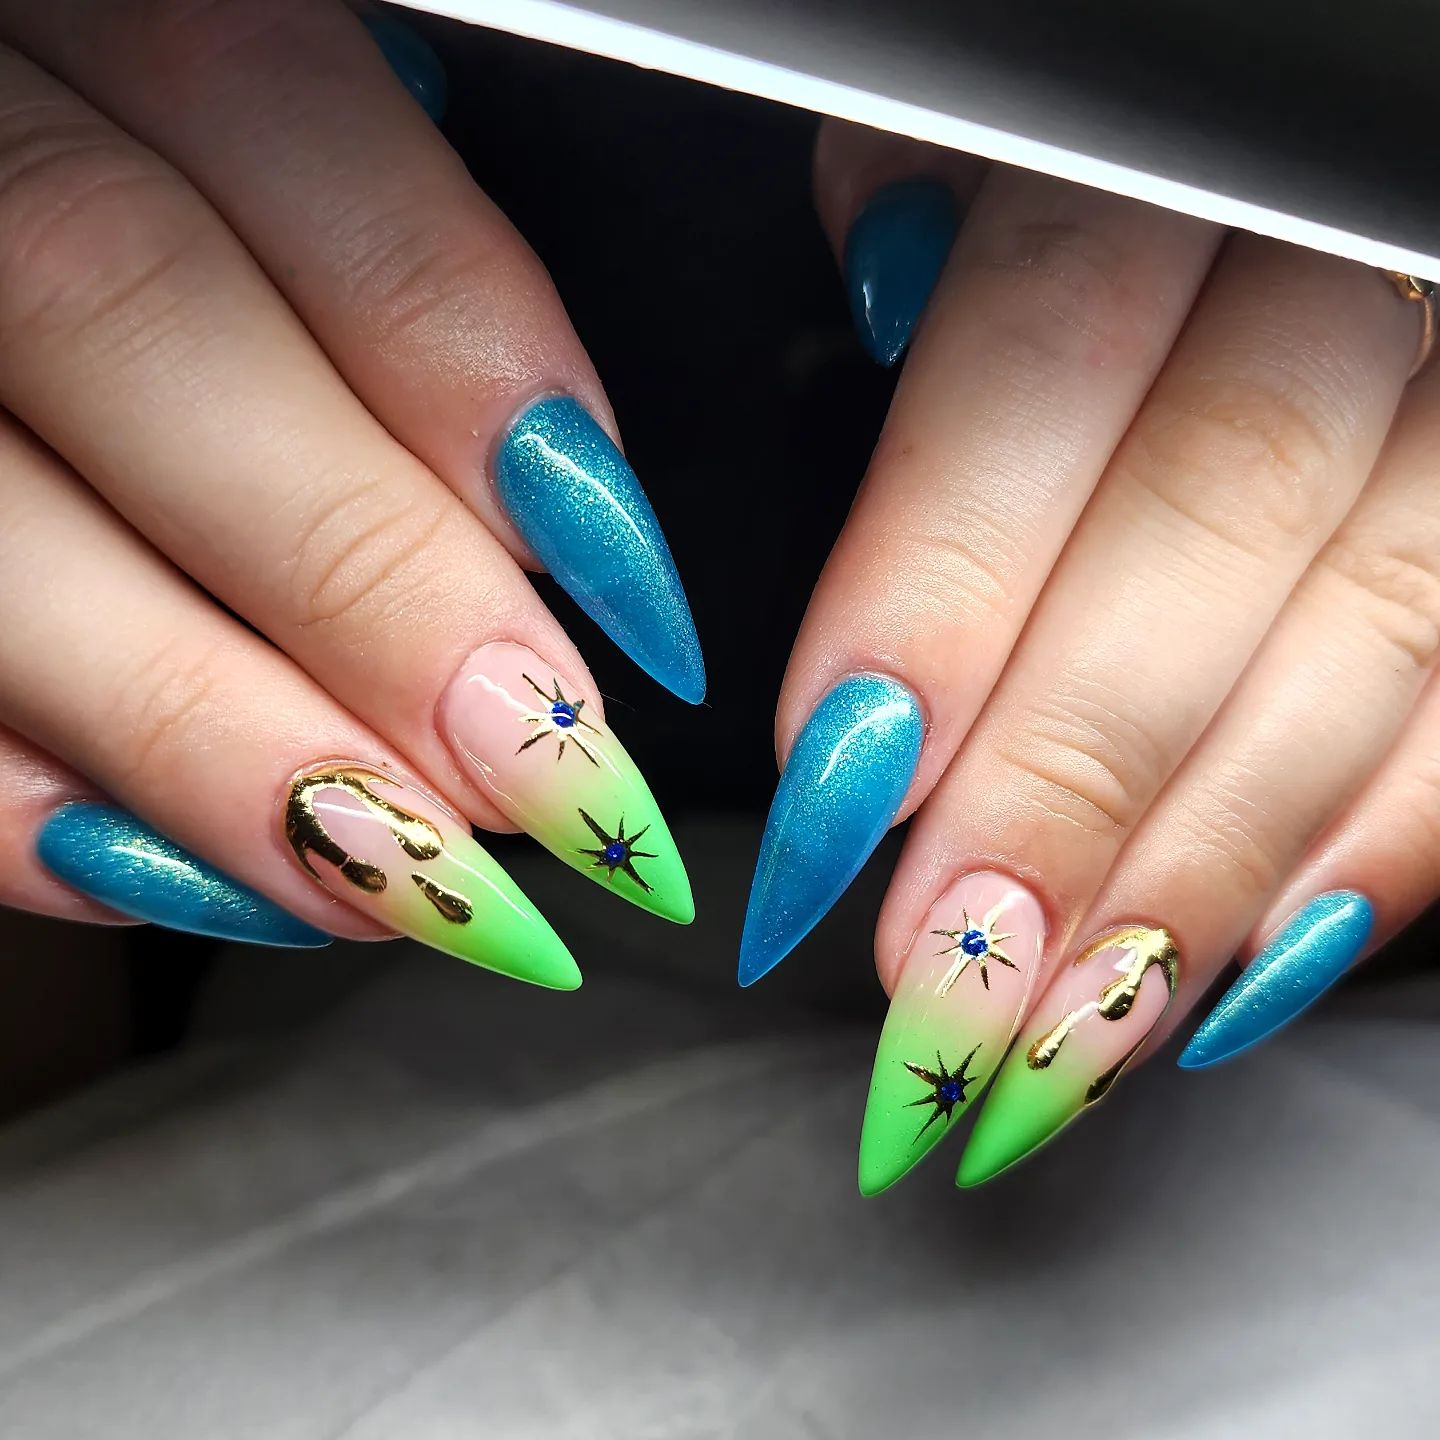 Shiny blue and green ombre stiletto nails look fabulous. If you want to add more to them, some gold stars and drip drops are the things that you should consider.